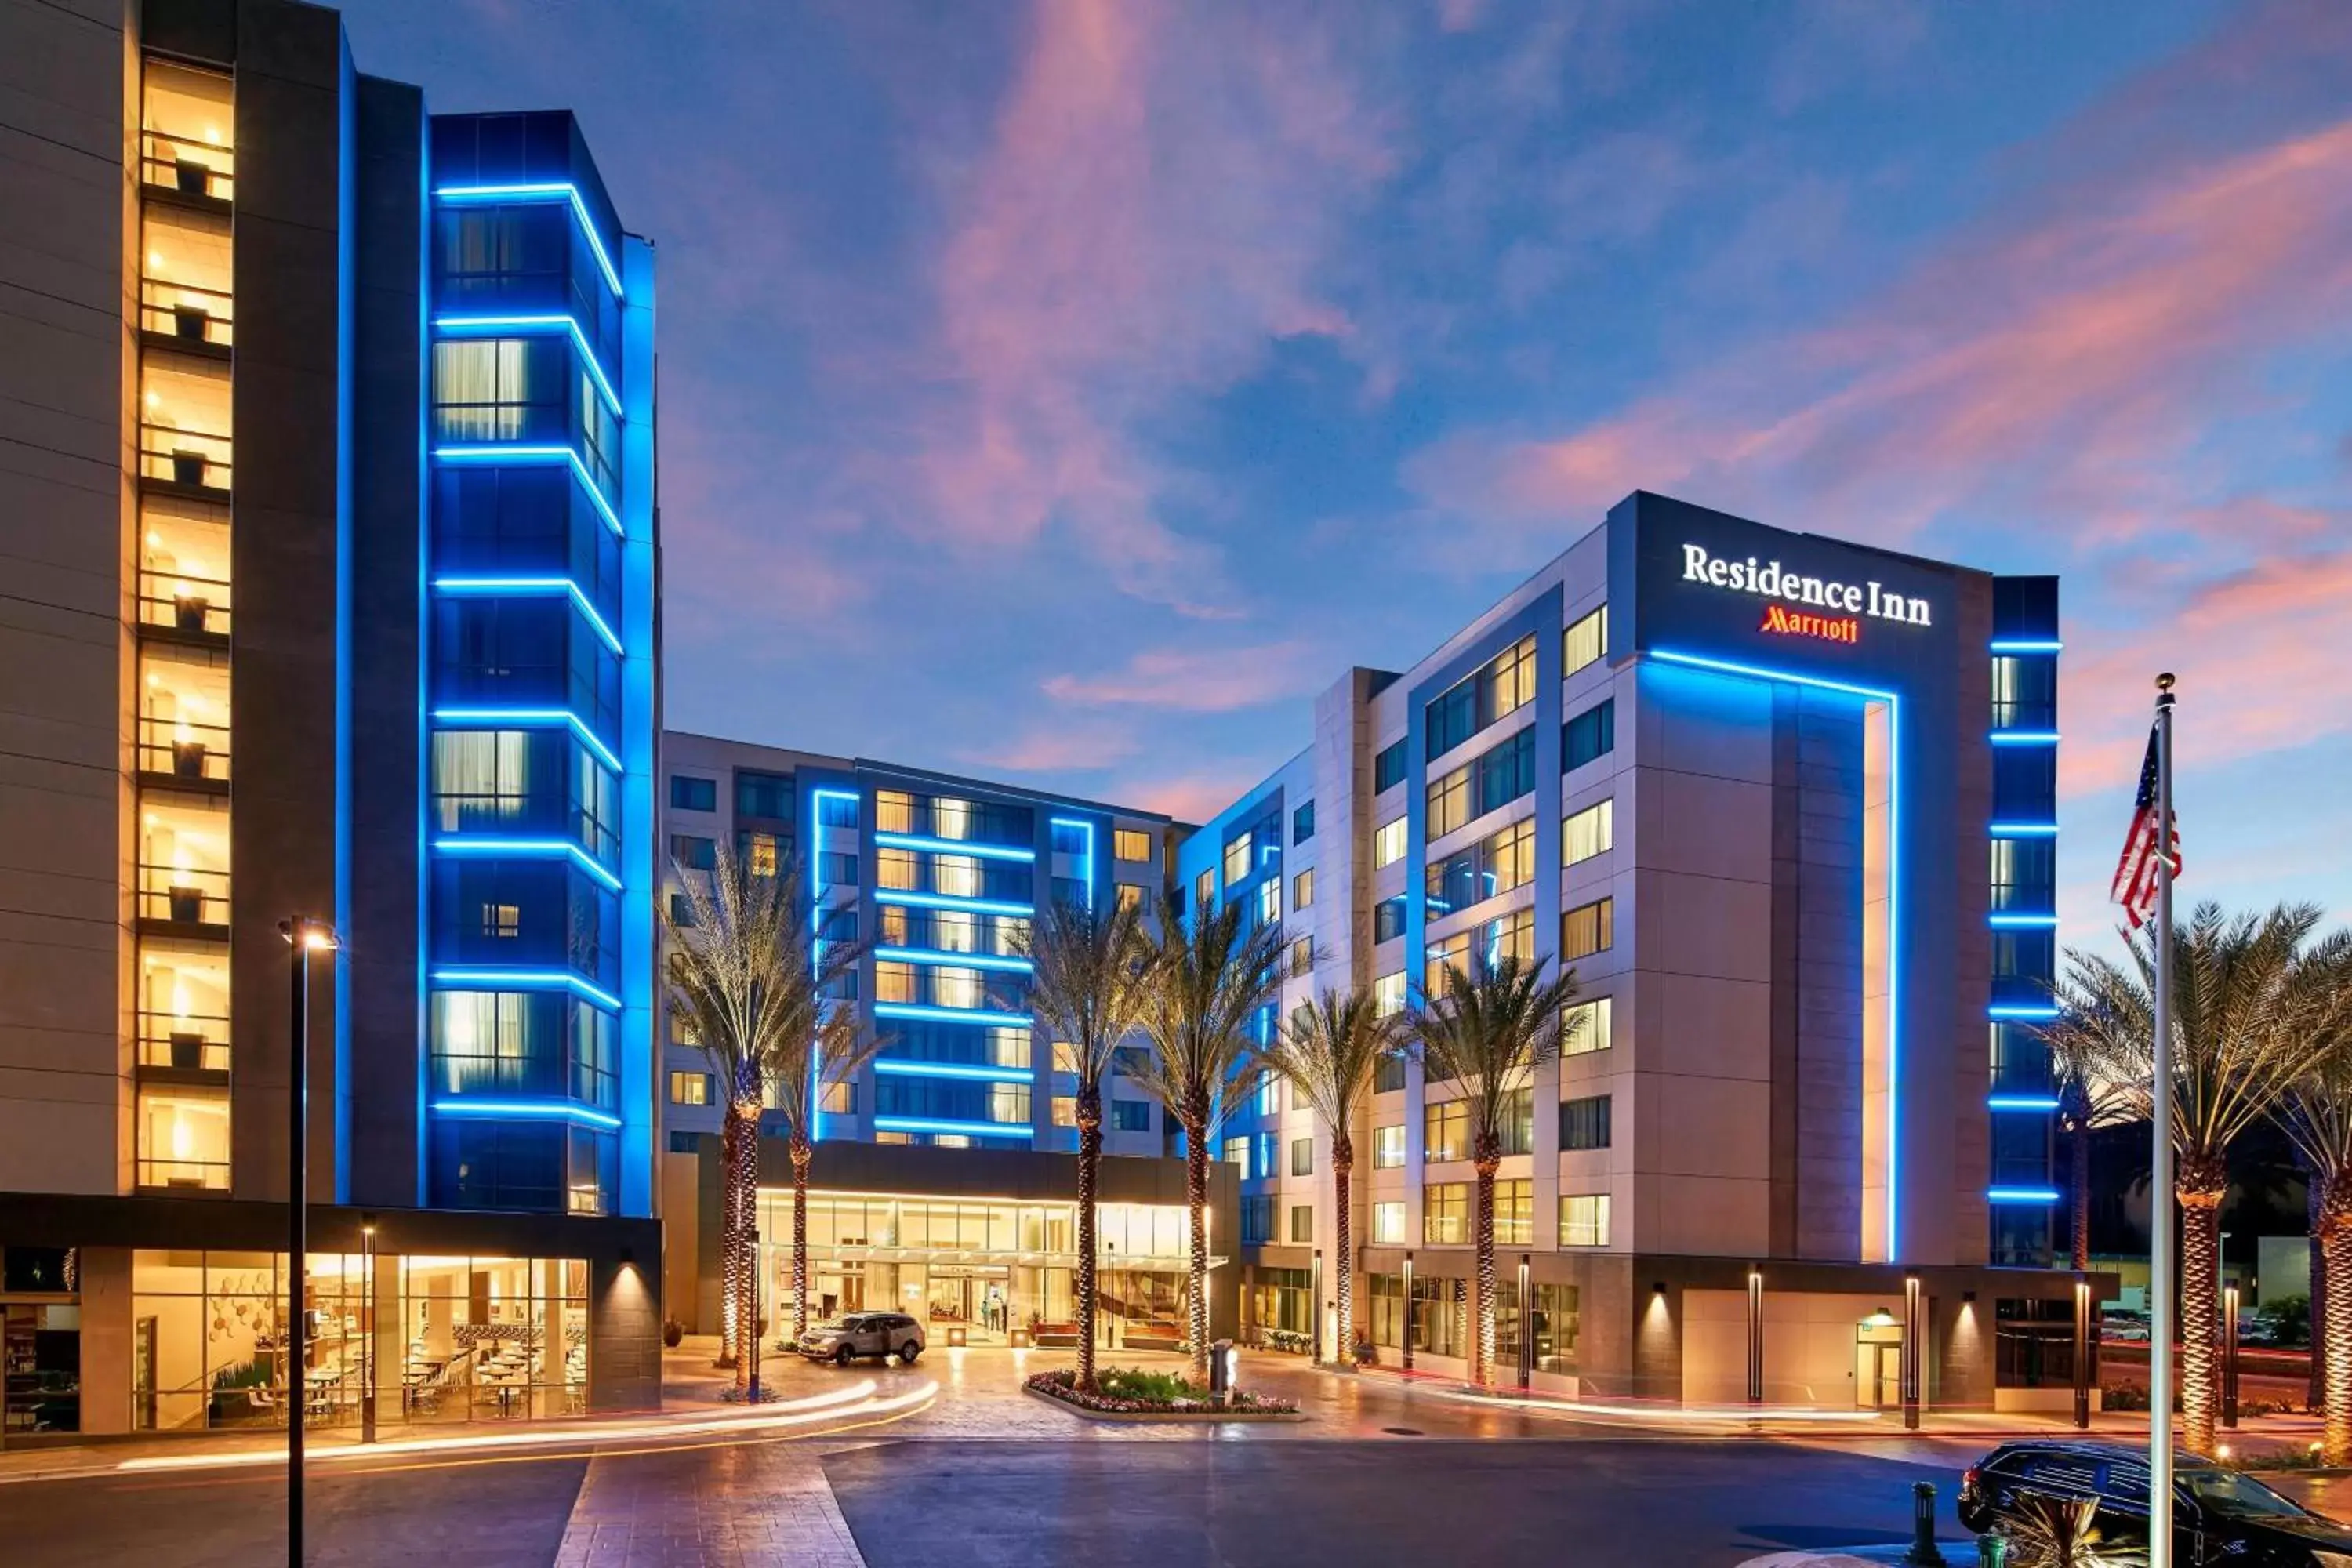 Property Building in Residence Inn by Marriott at Anaheim Resort/Convention Center